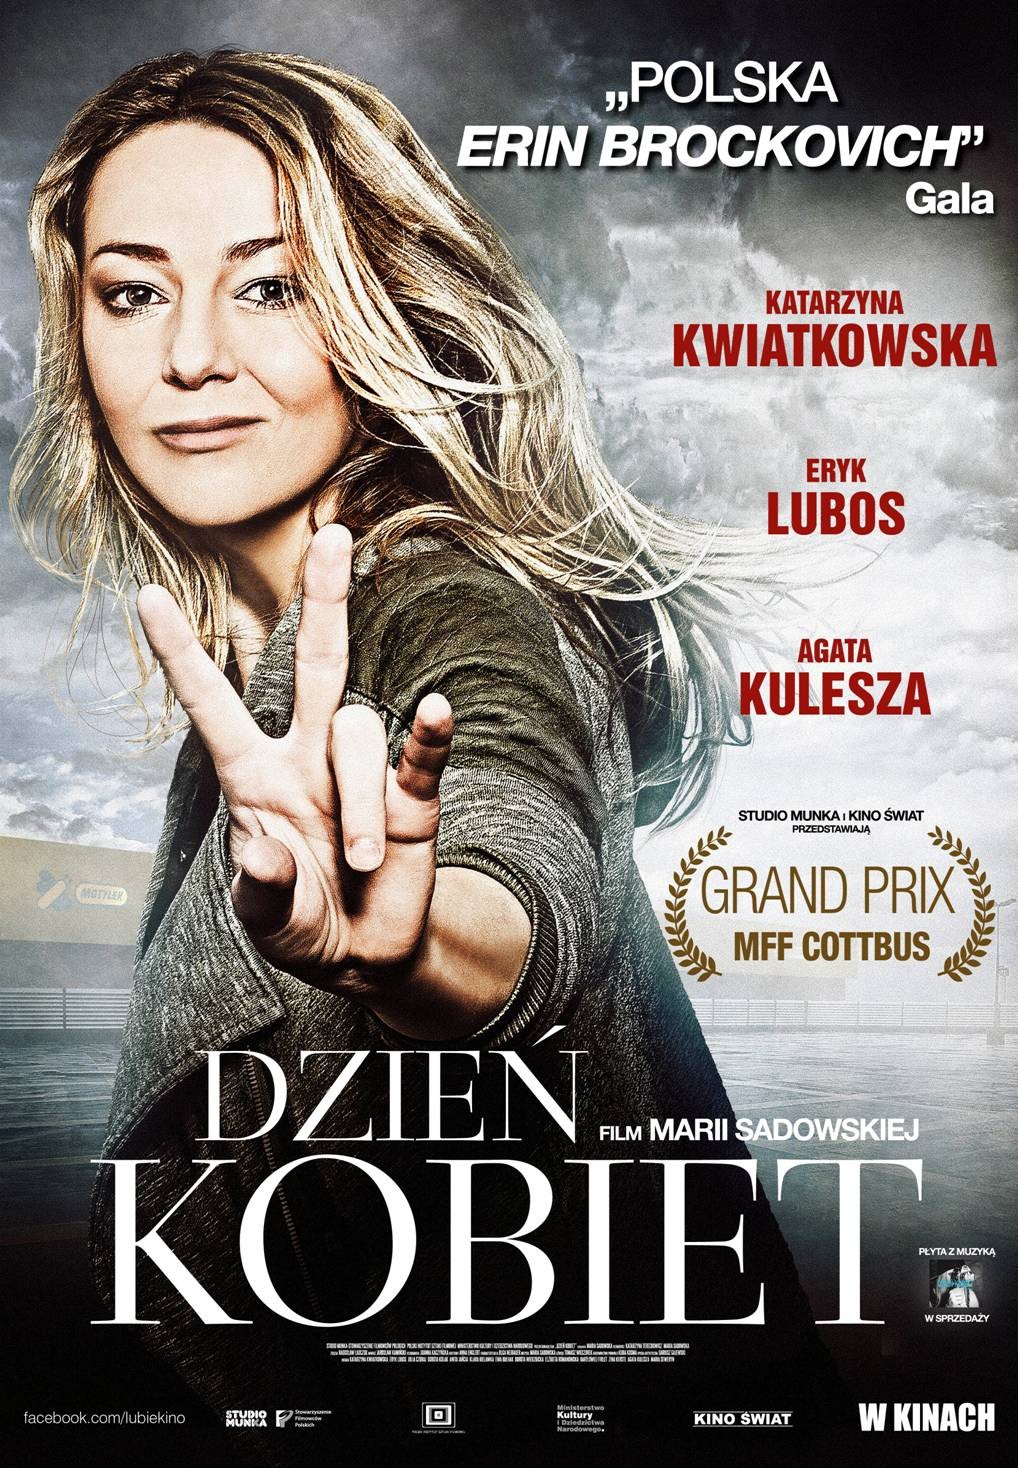 Extra Large Movie Poster Image for Dzien kobiet (#2 of 2)